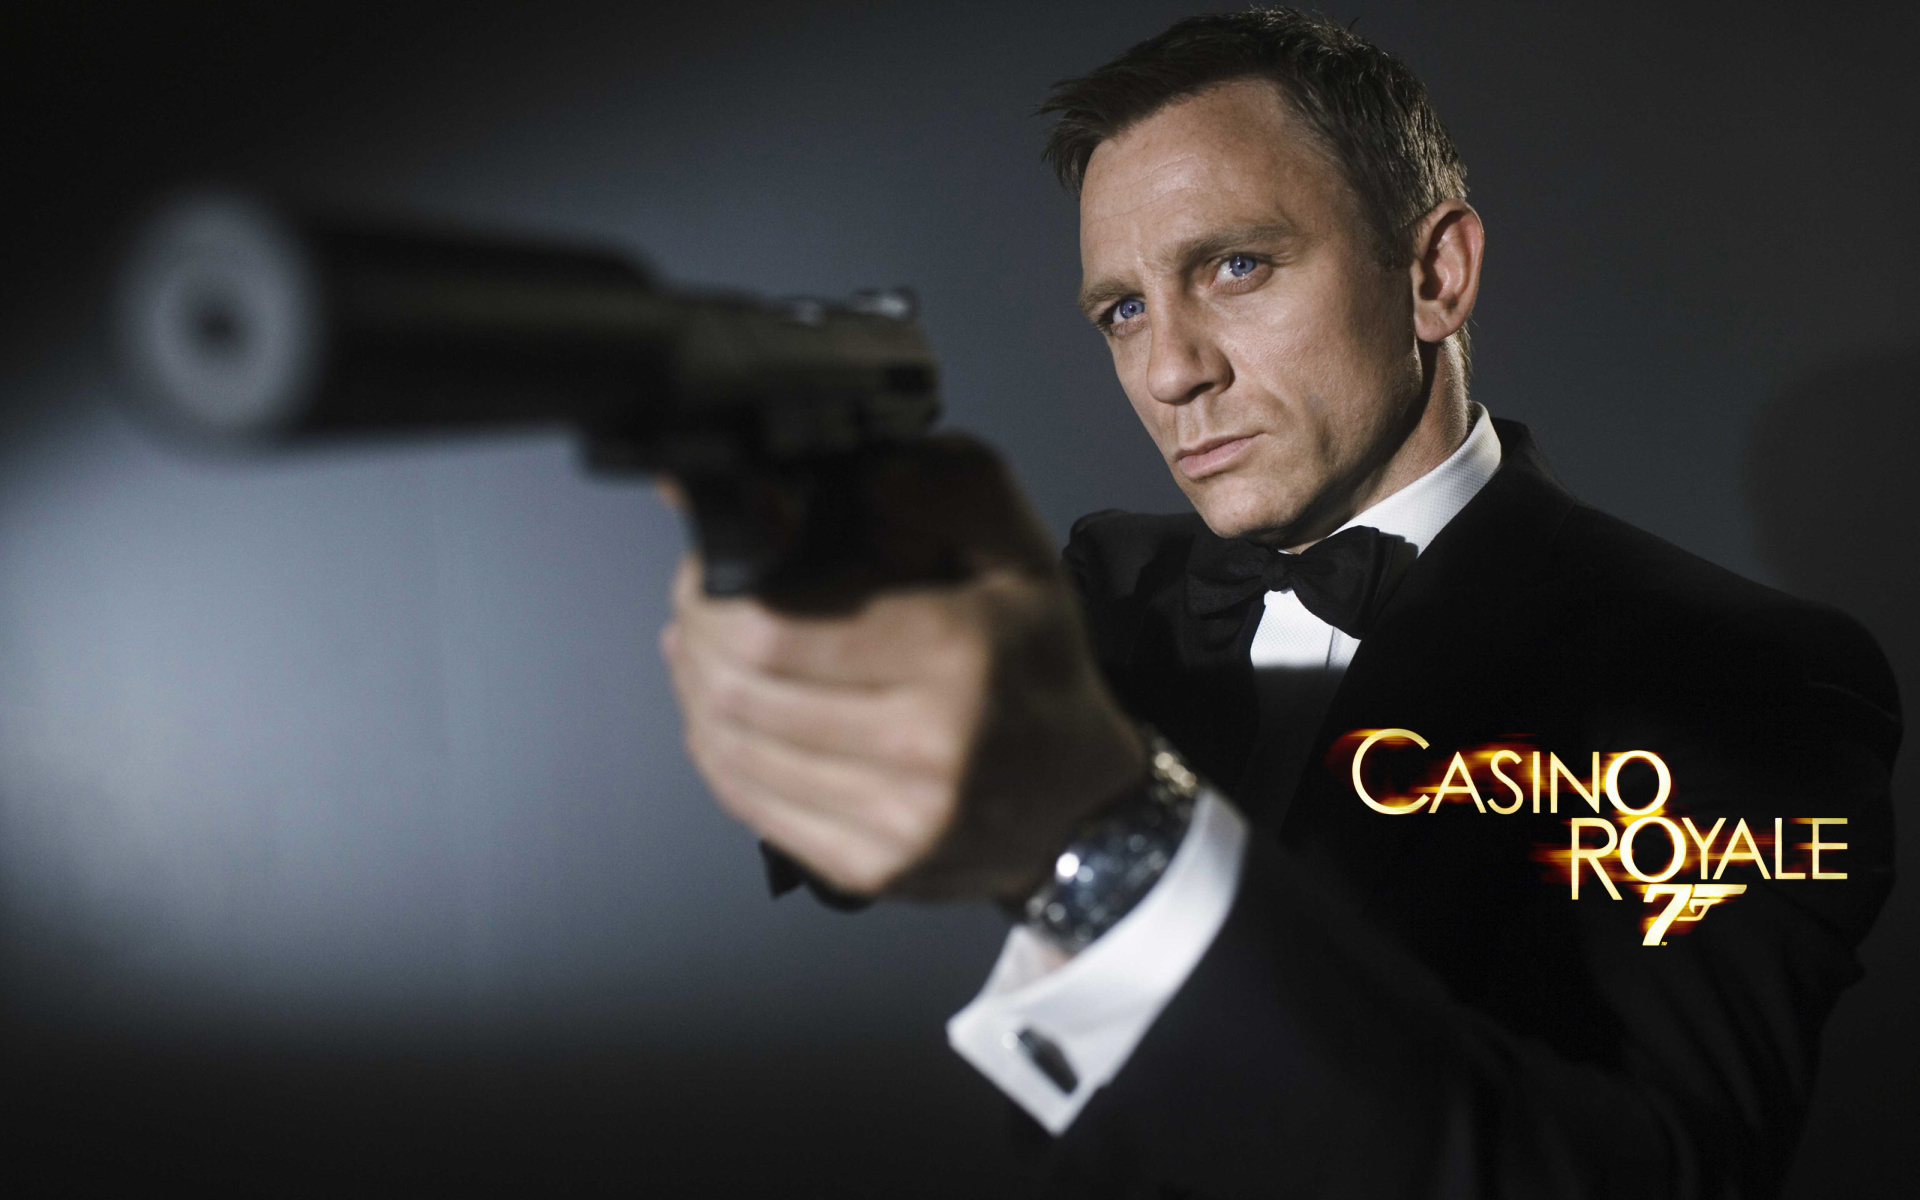 The Best Casino Royale Wallpaper Ever